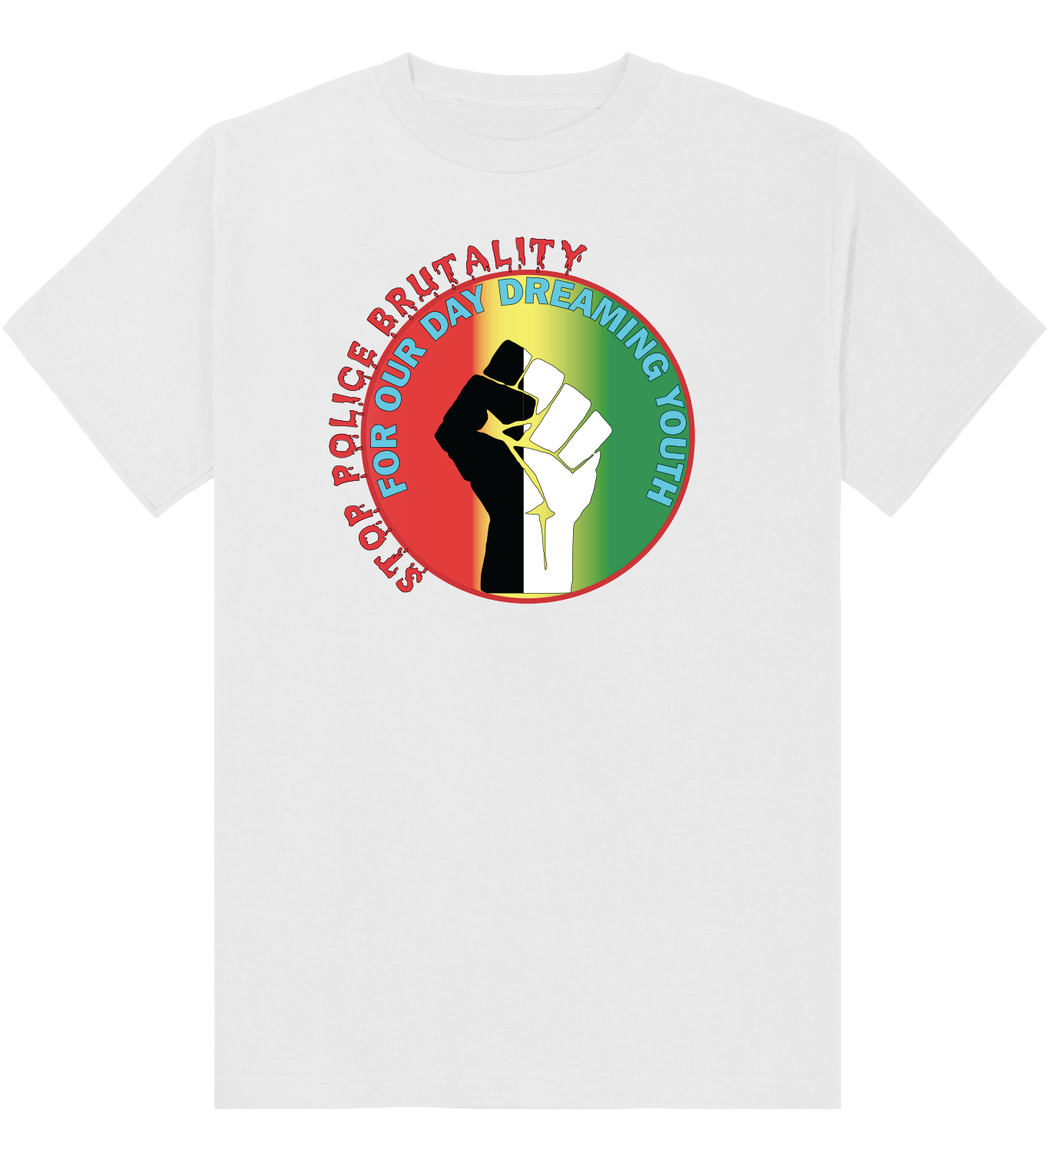 Stop Police Brutality T-Shirt